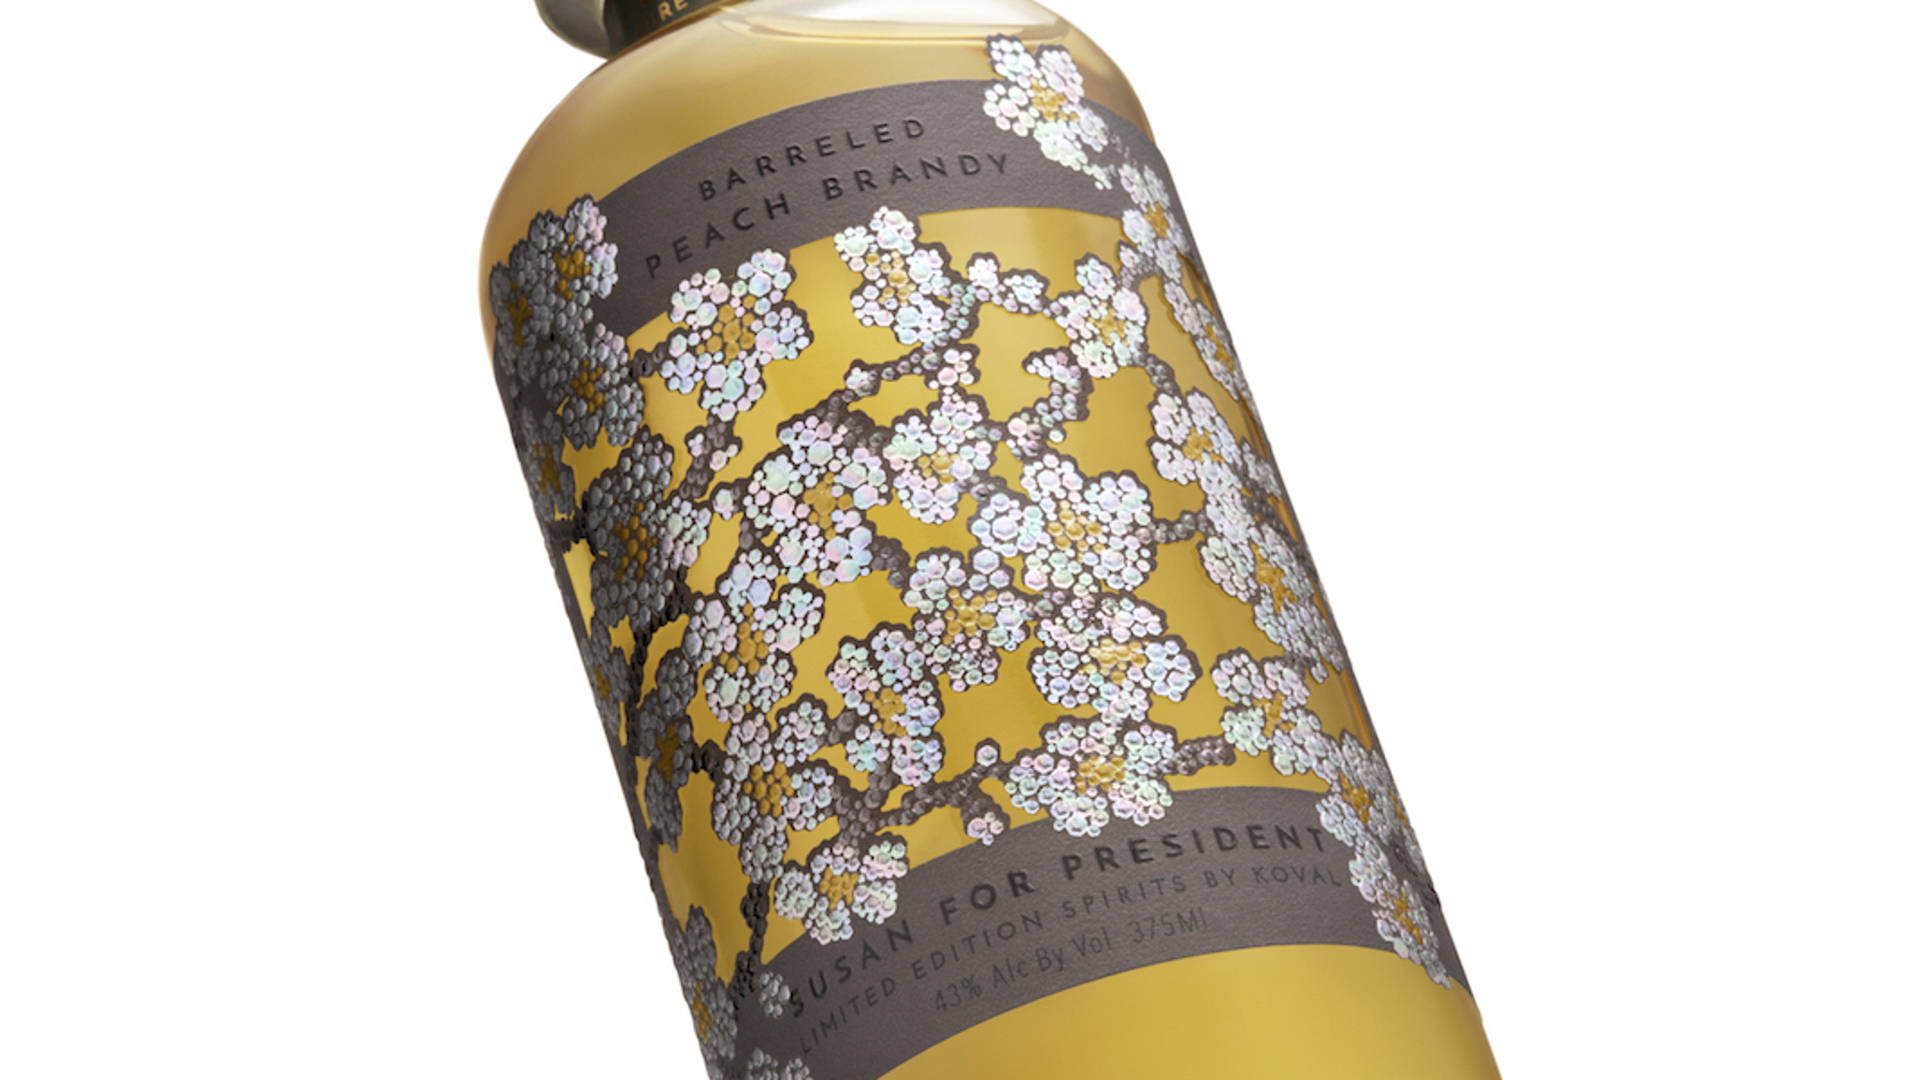 Featured image for Susan for President Limited Edition Spirits by KOVAL: Barreled Peach Brandy